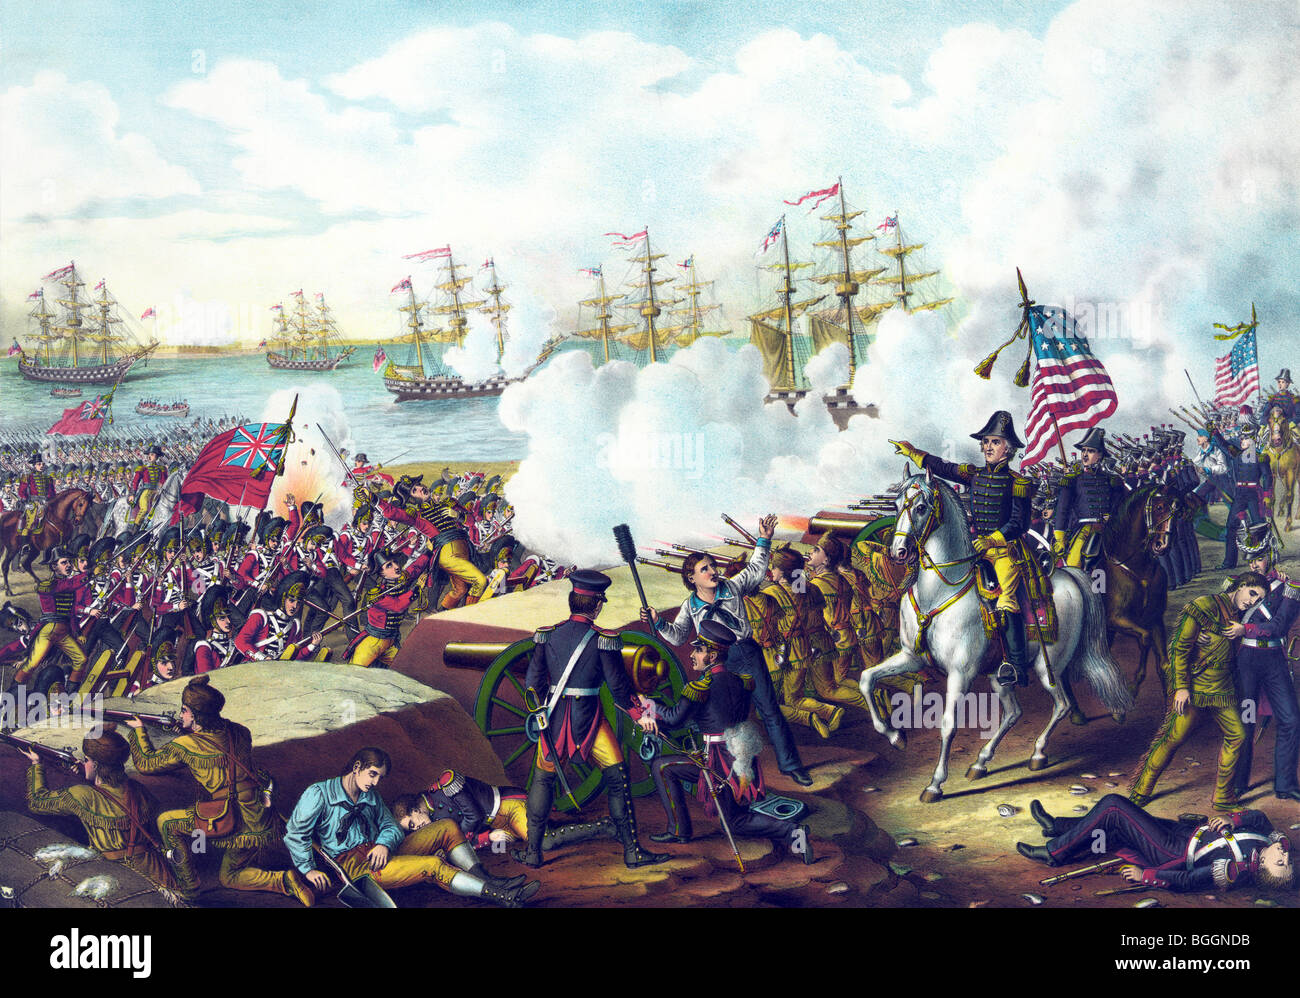 Print depicting the final day of the Battle of New Orleans on January 8 1815 in which US forces defeated the British Army. Stock Photo